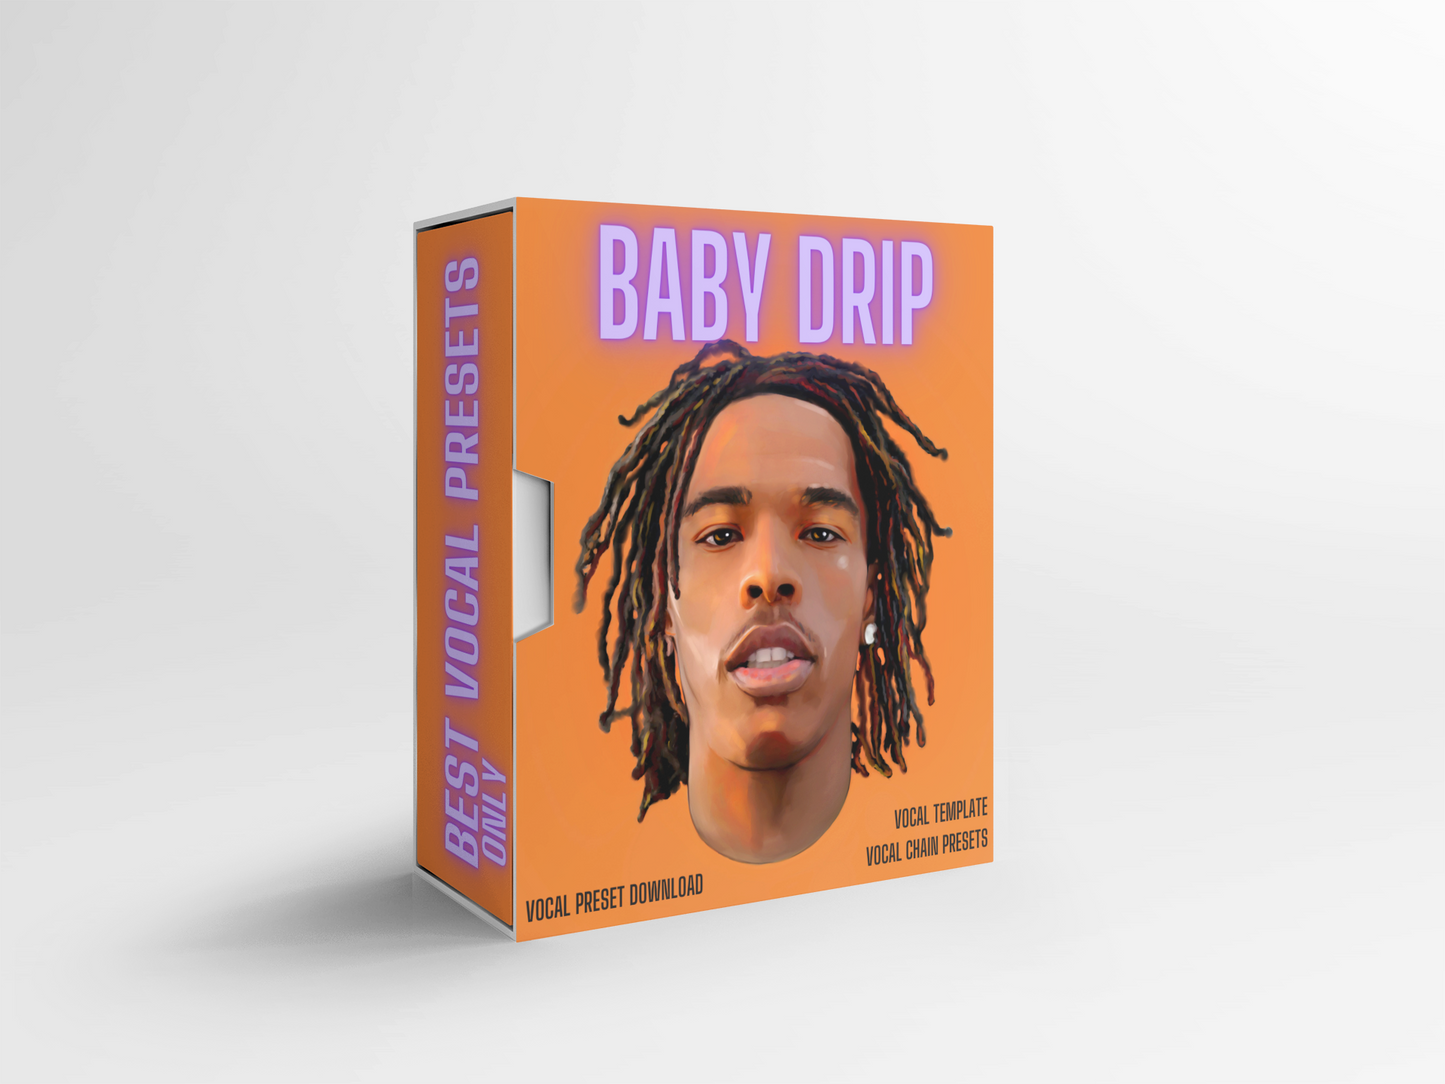 Lil Baby Vocal Preset "Baby Drip"